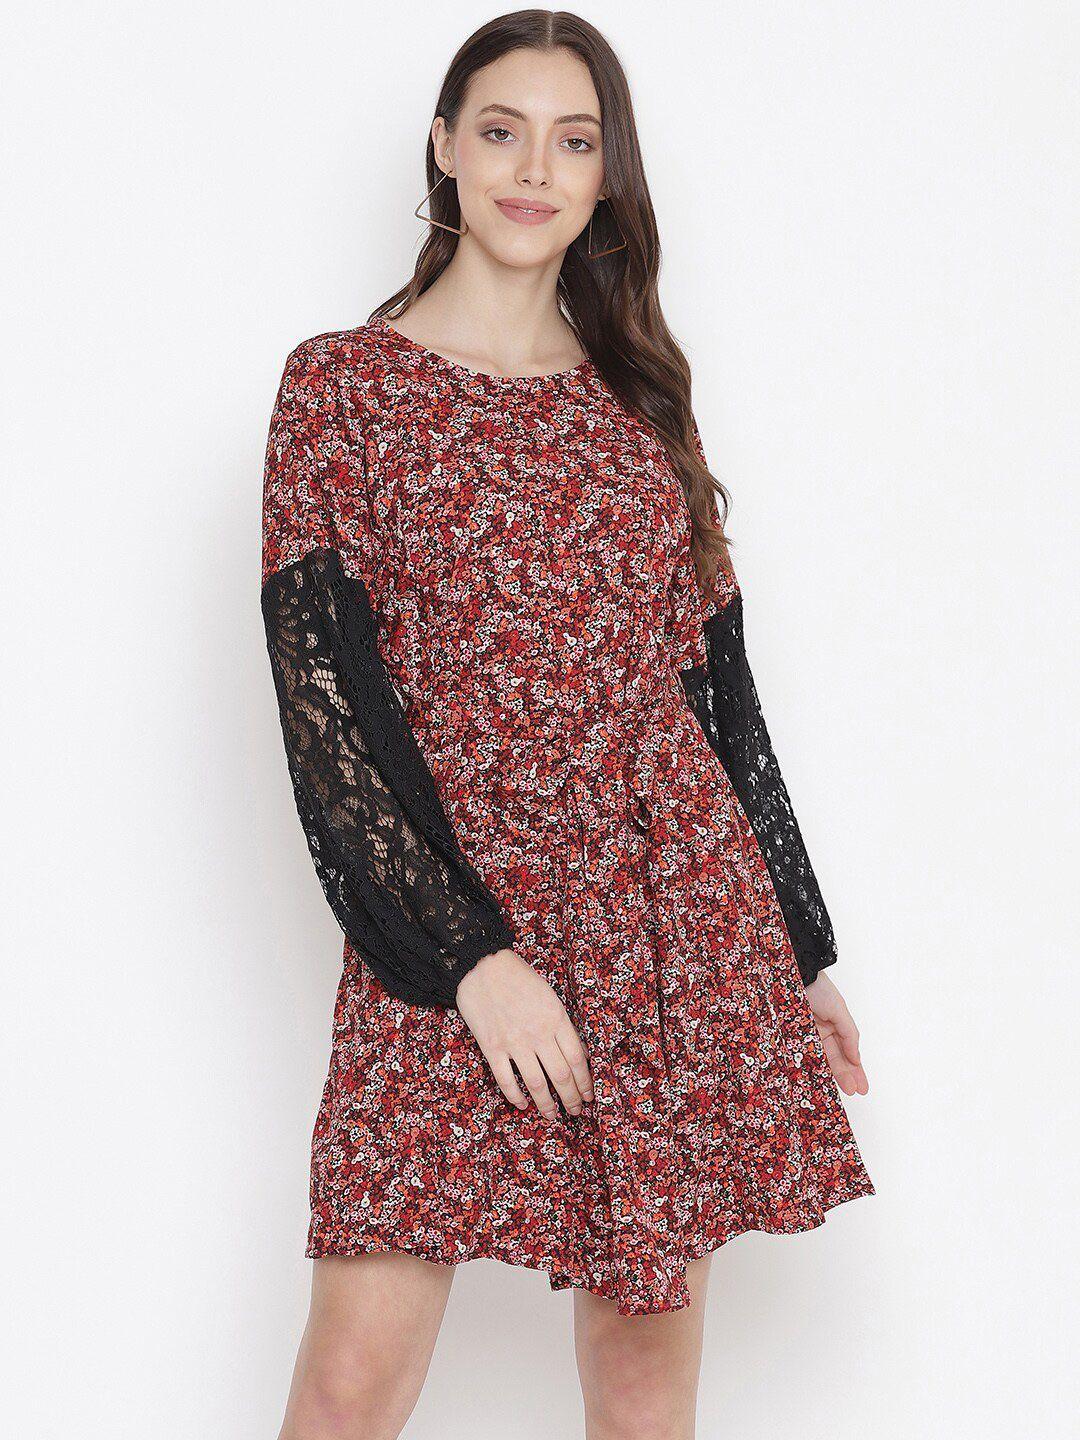 Oxolloxo Red Floral A-Line Dress